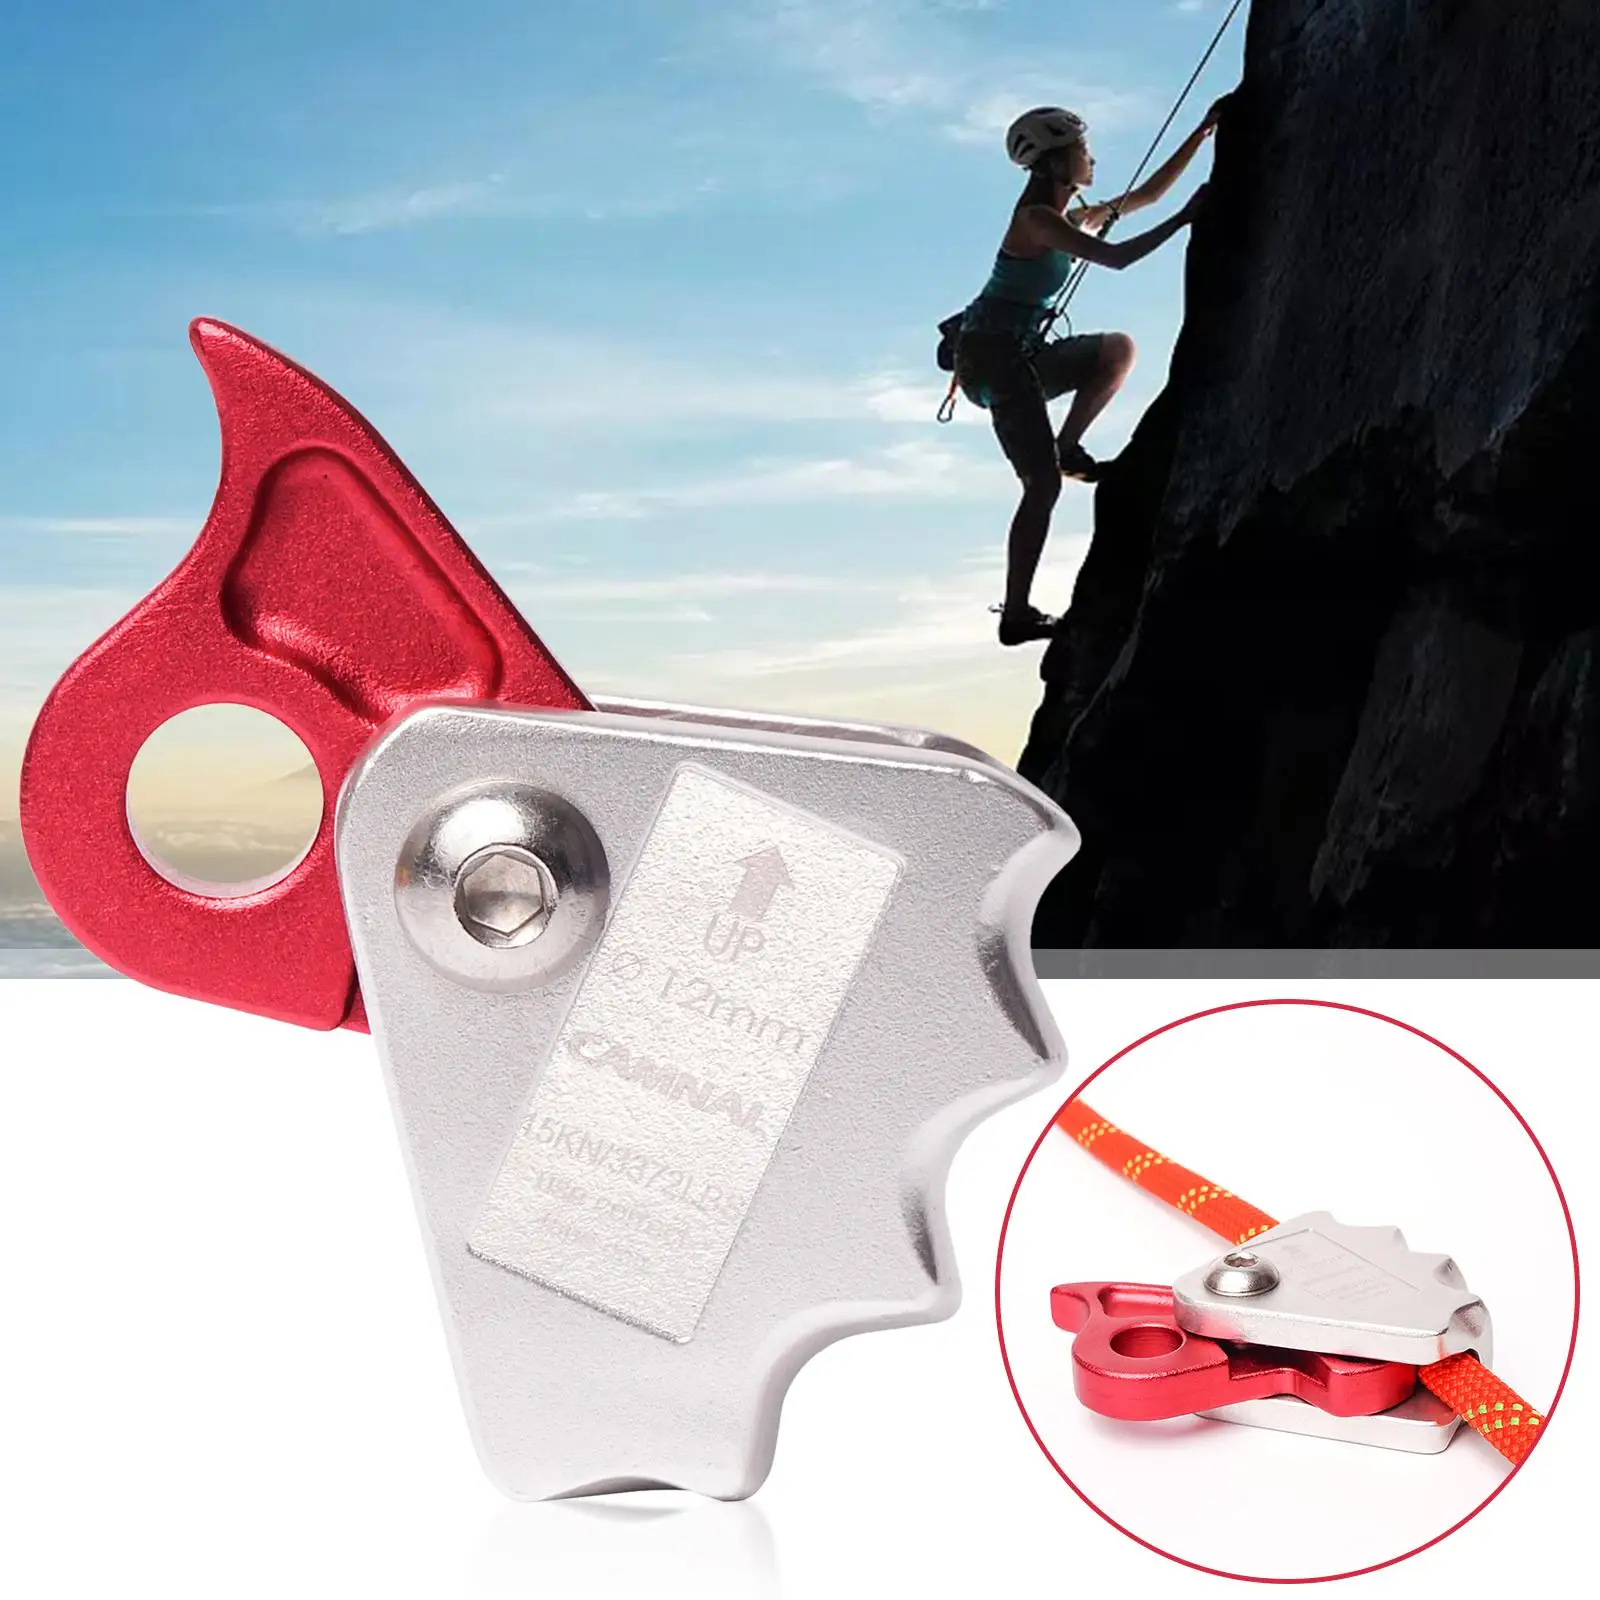 Fall Arrester Mountaineering Rock Climbing Rope Clamp High Strength Self Locking Device for Fall Protection